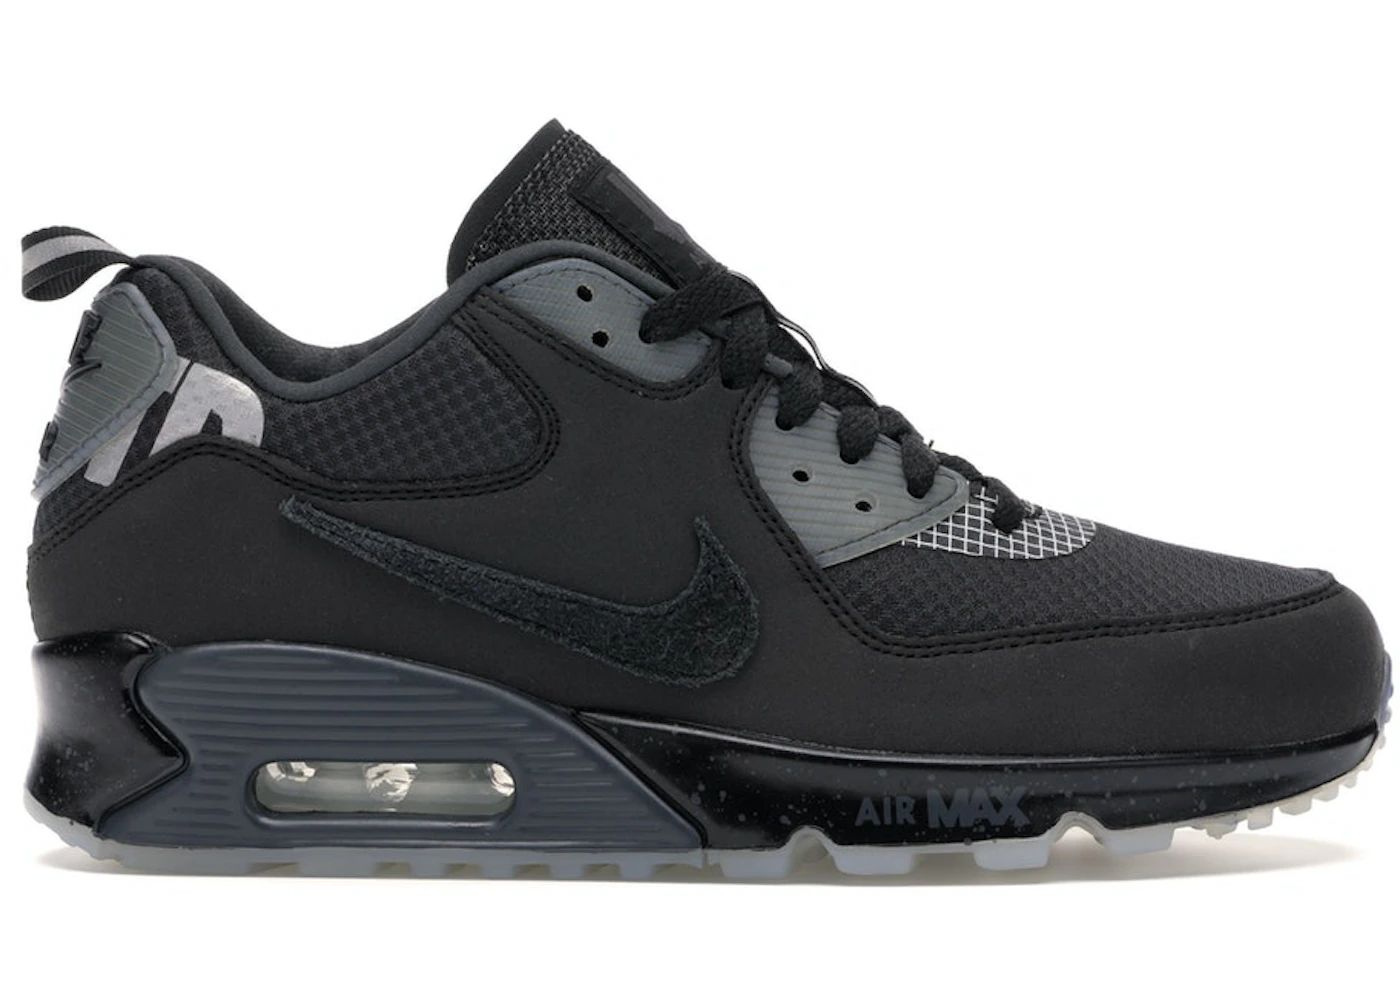 Nike Air Max 90 20 Undefeated Black Men's - CQ2289-002 - US